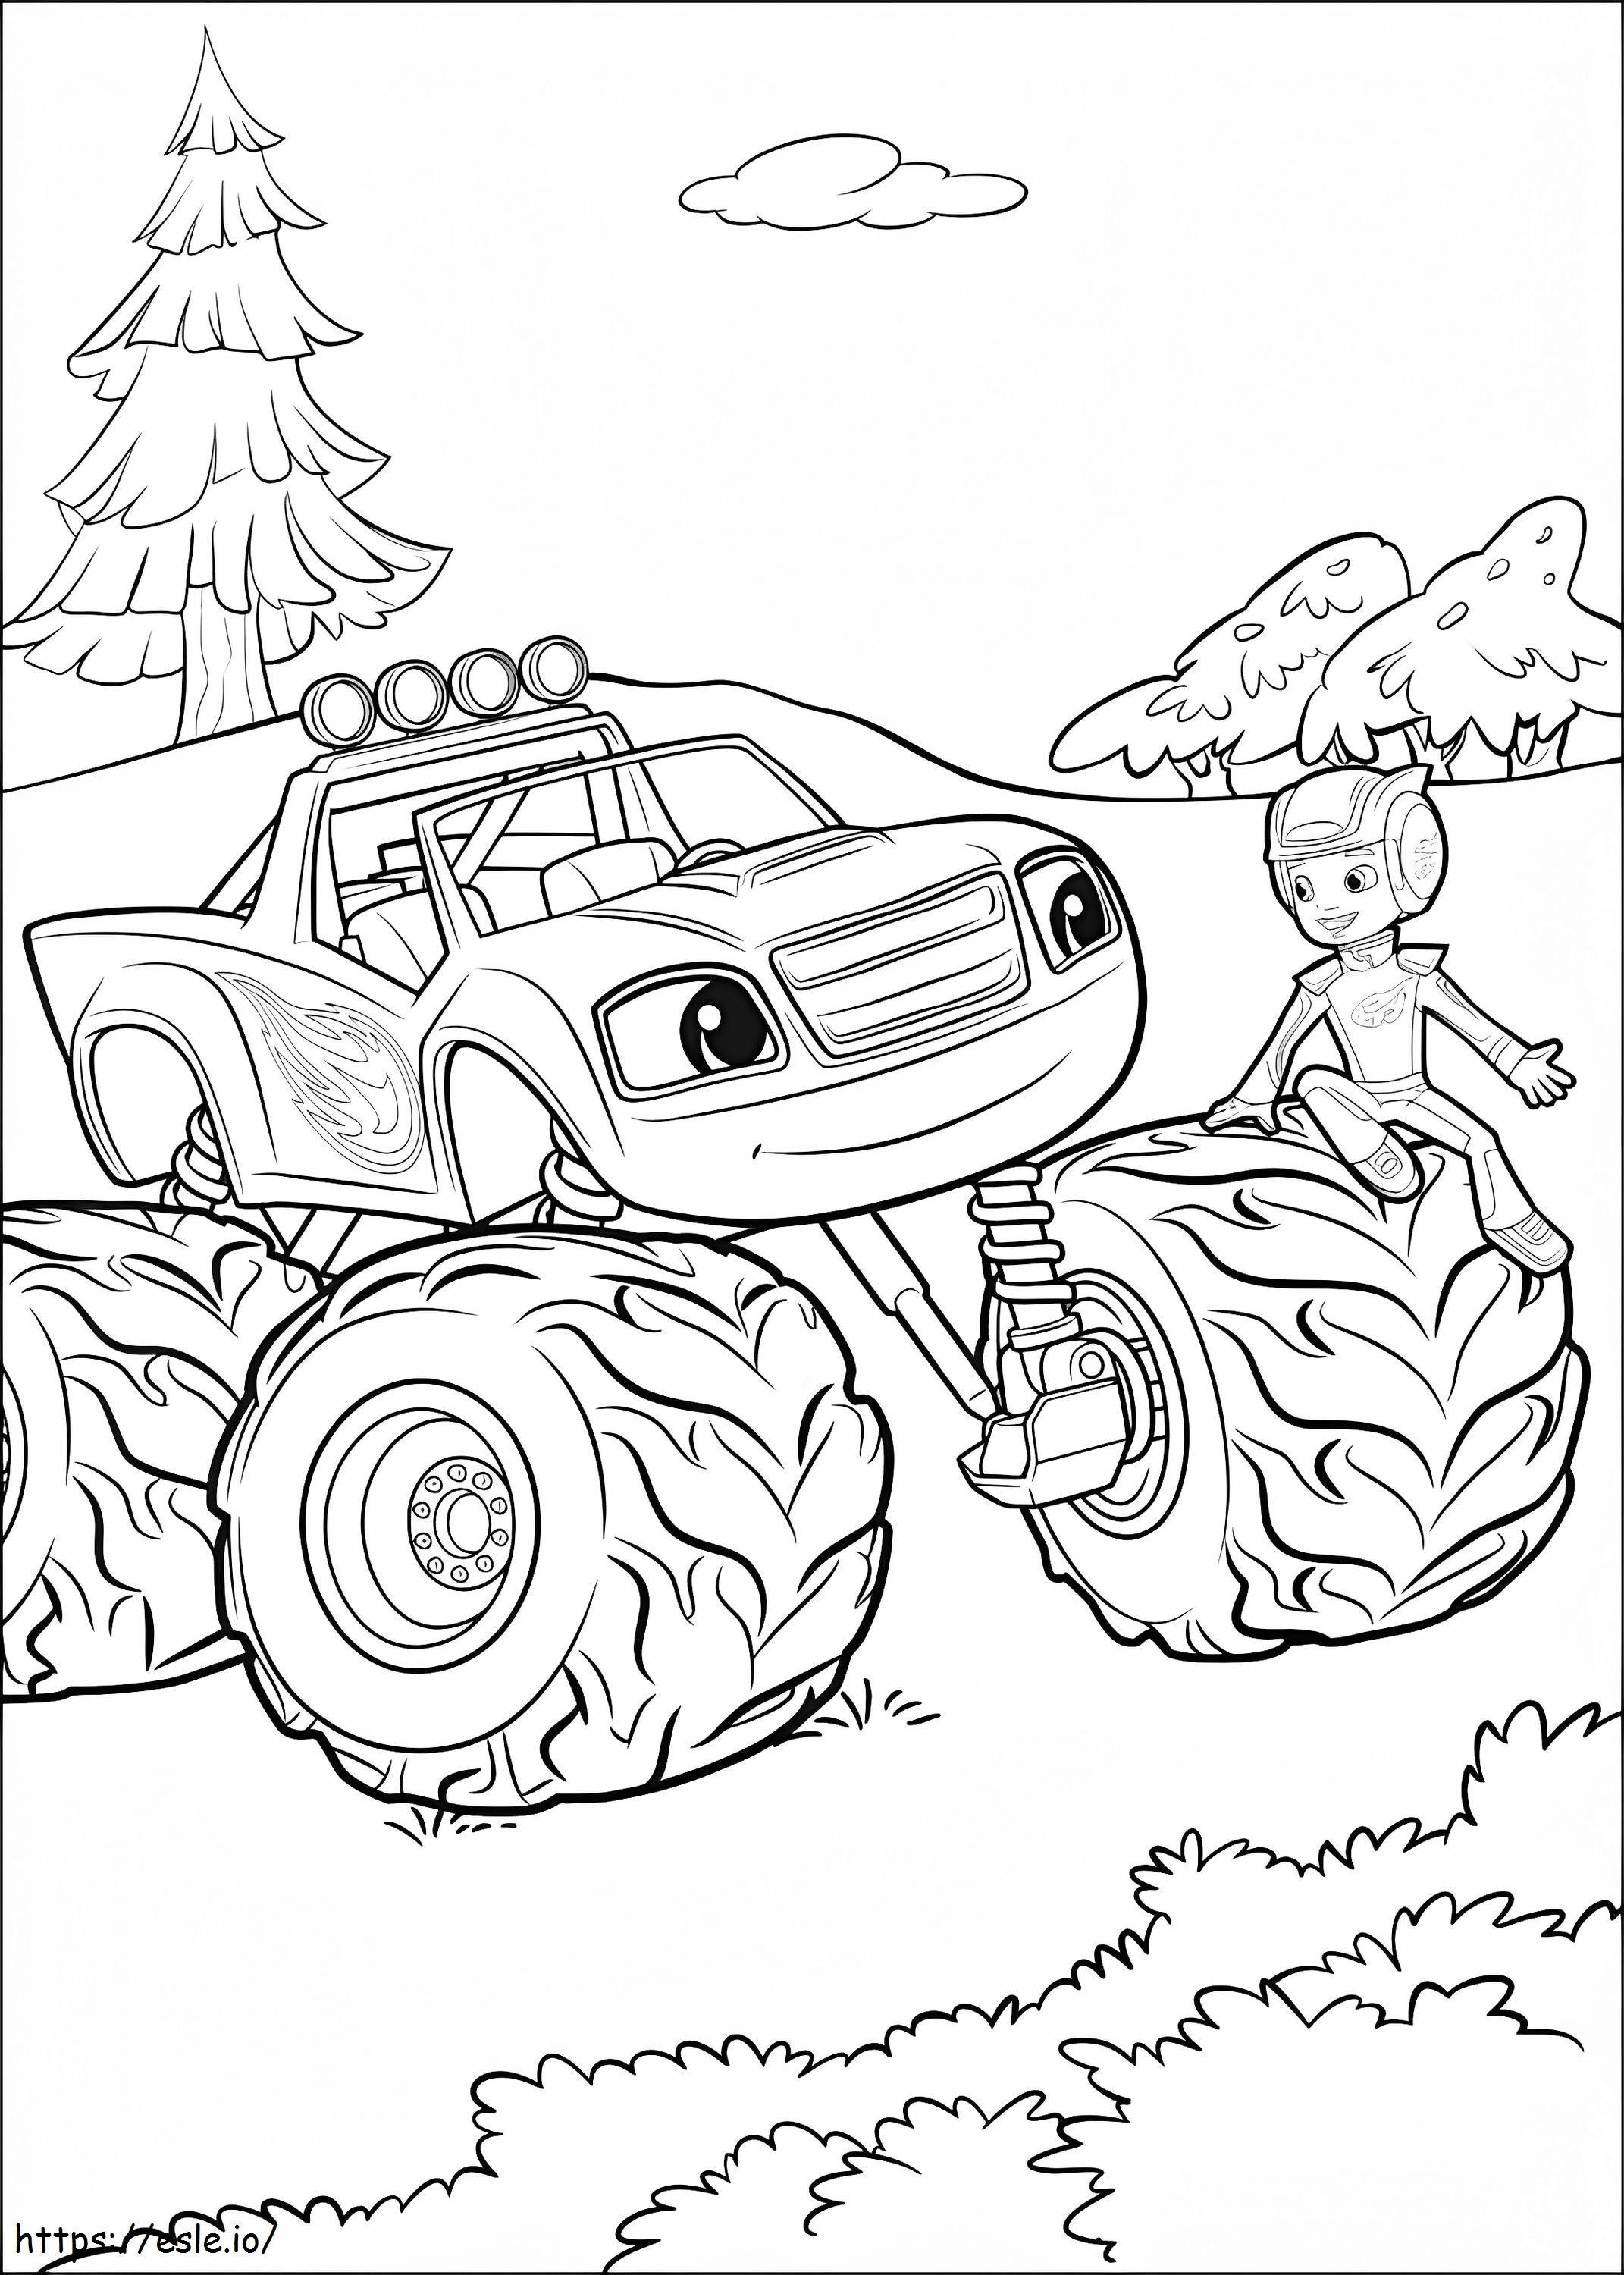 1533953317 Aj Sitting On Wheel A4 coloring page